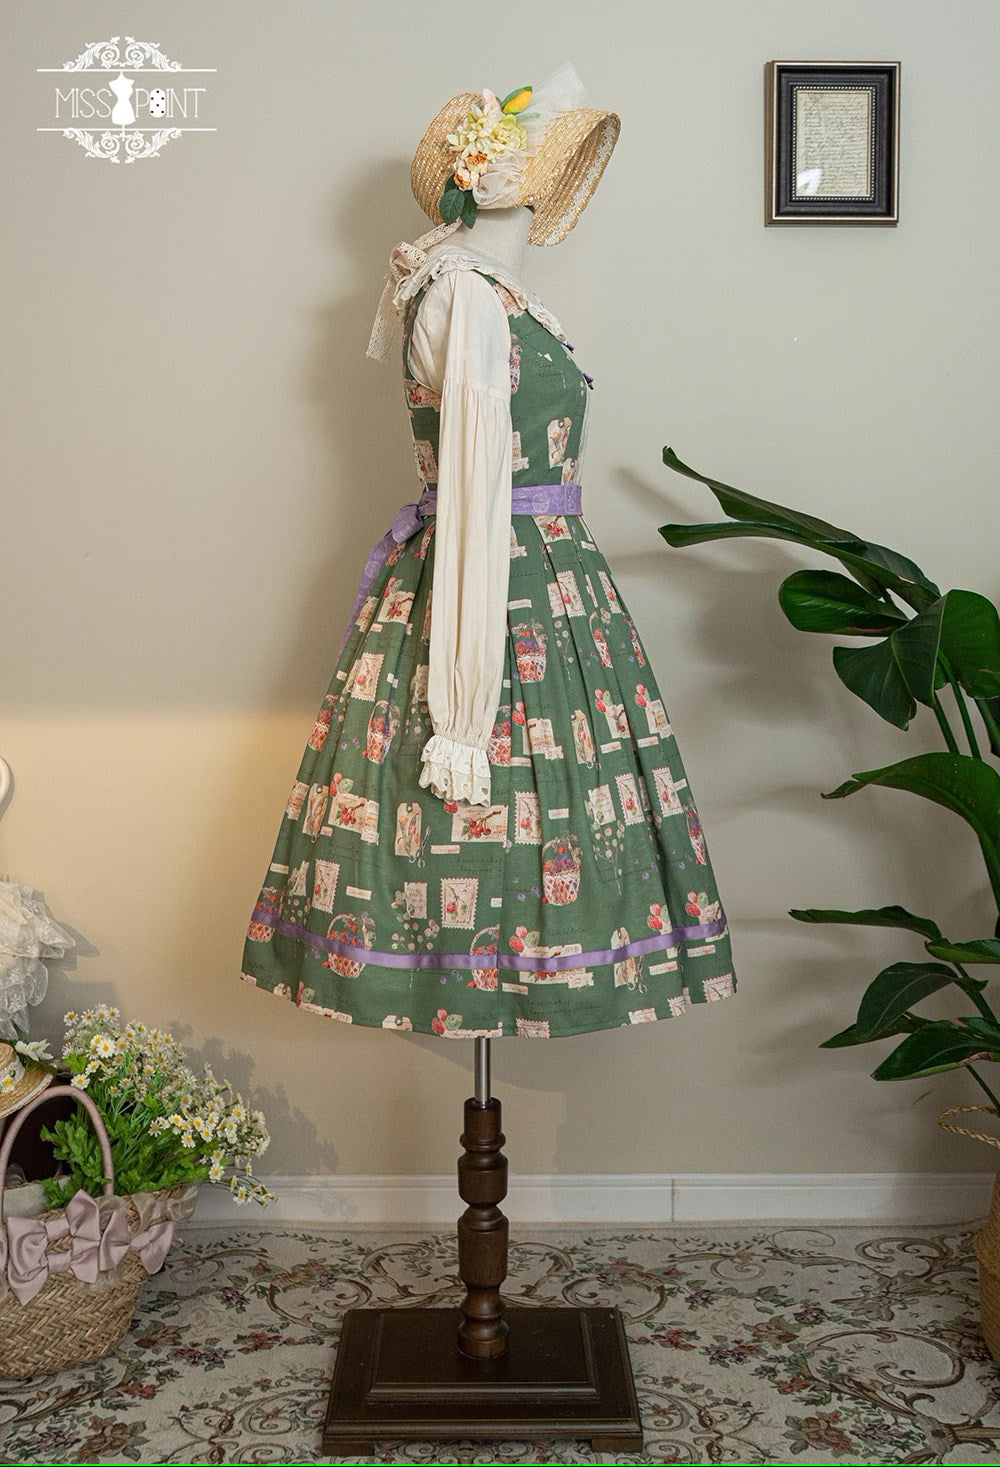 [Sale period ended] Forest Picture Book Printed Jumper Skirt